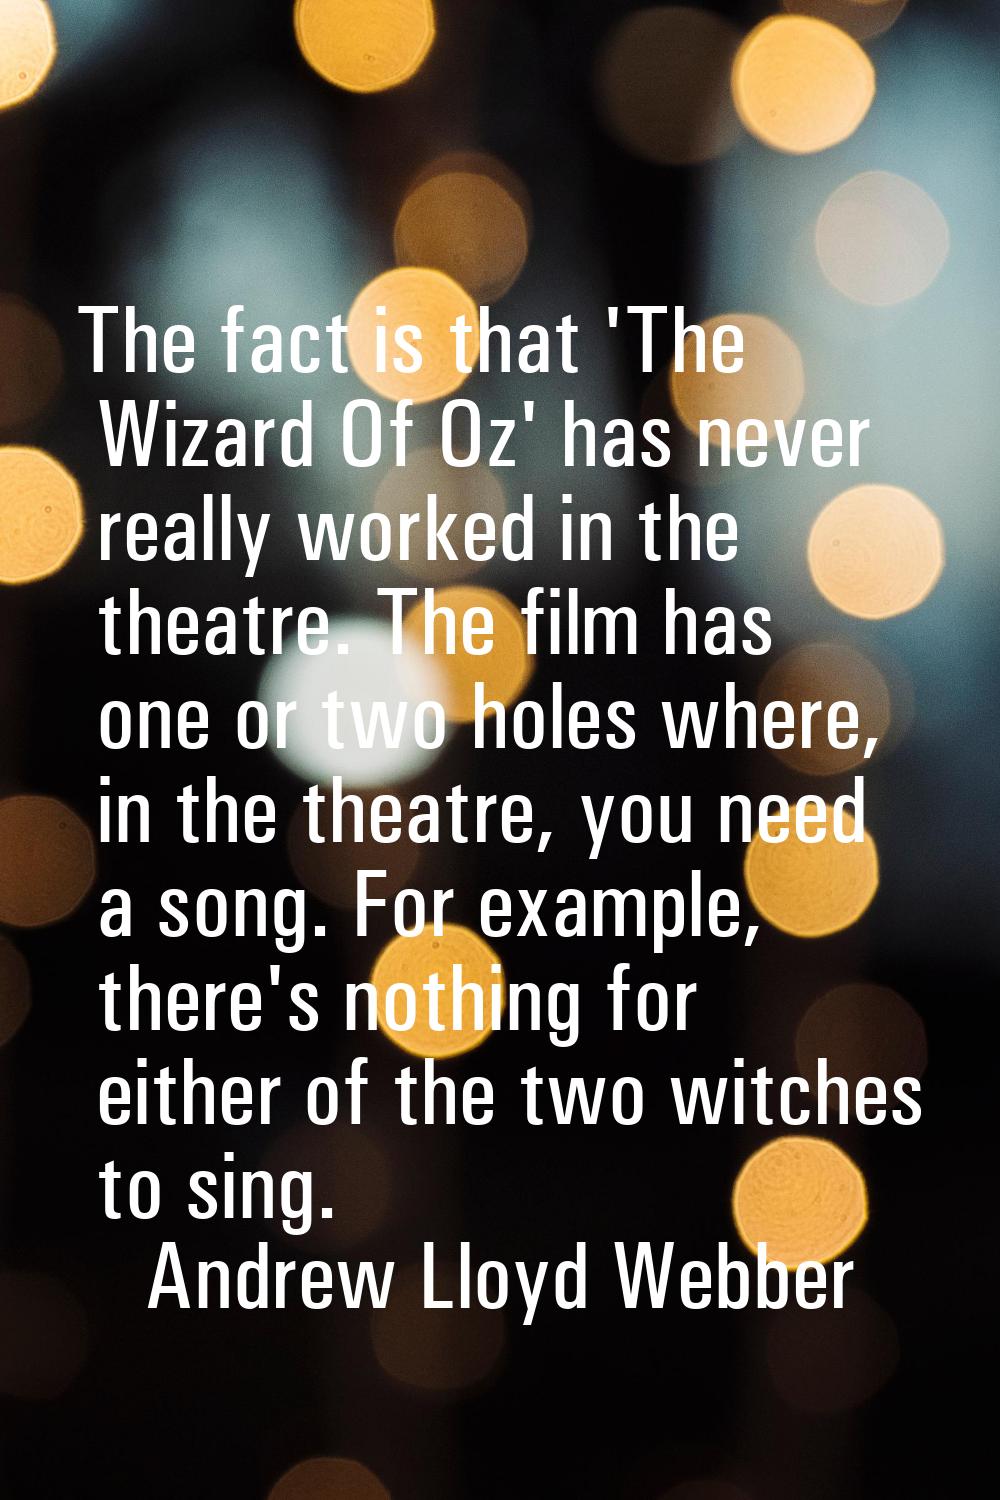 The fact is that 'The Wizard Of Oz' has never really worked in the theatre. The film has one or two